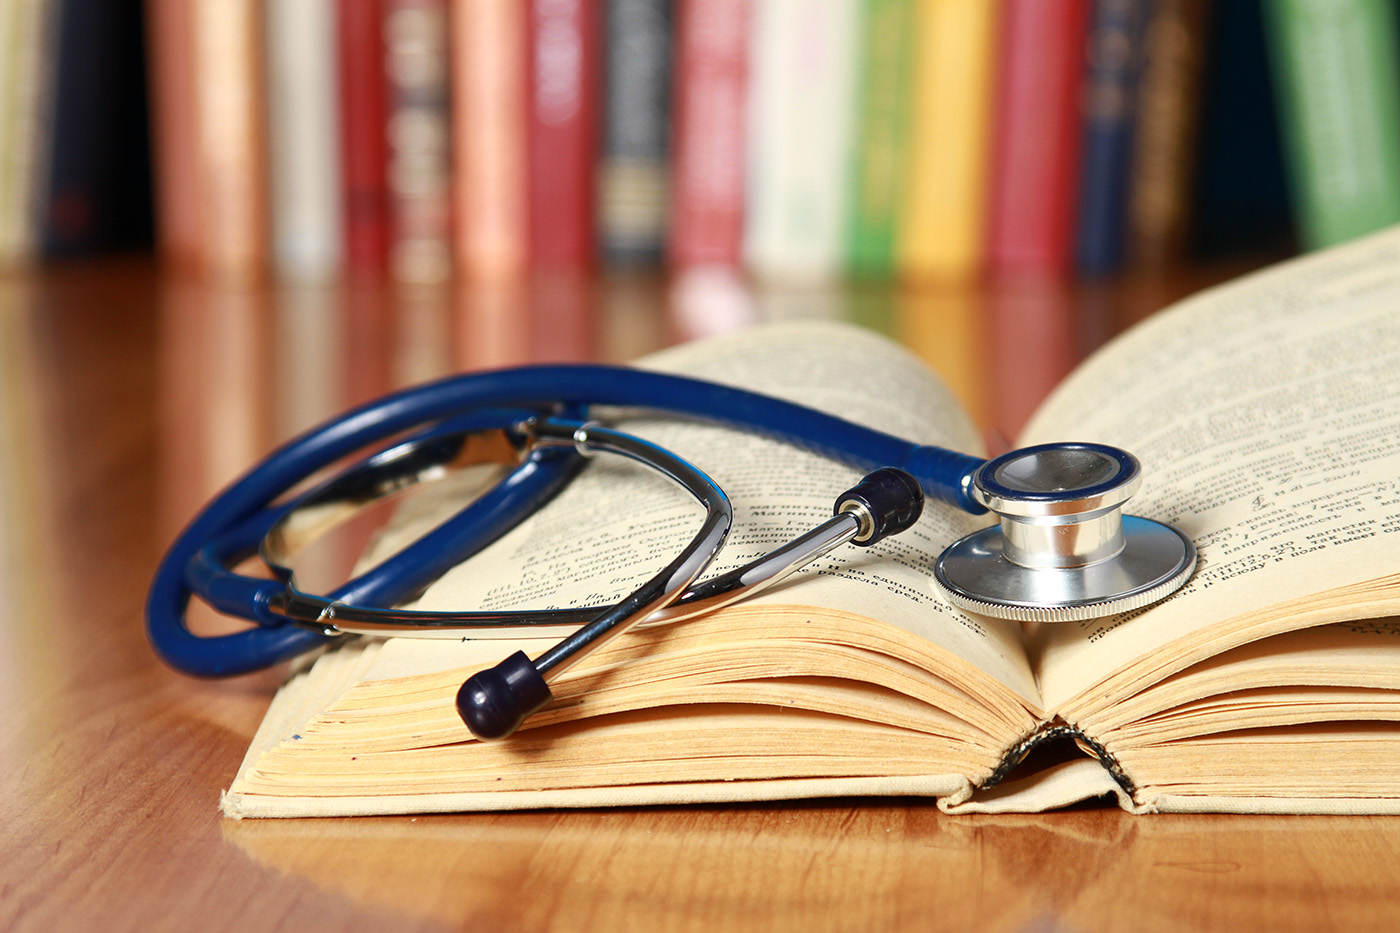 A stethoscope lying on an open book.